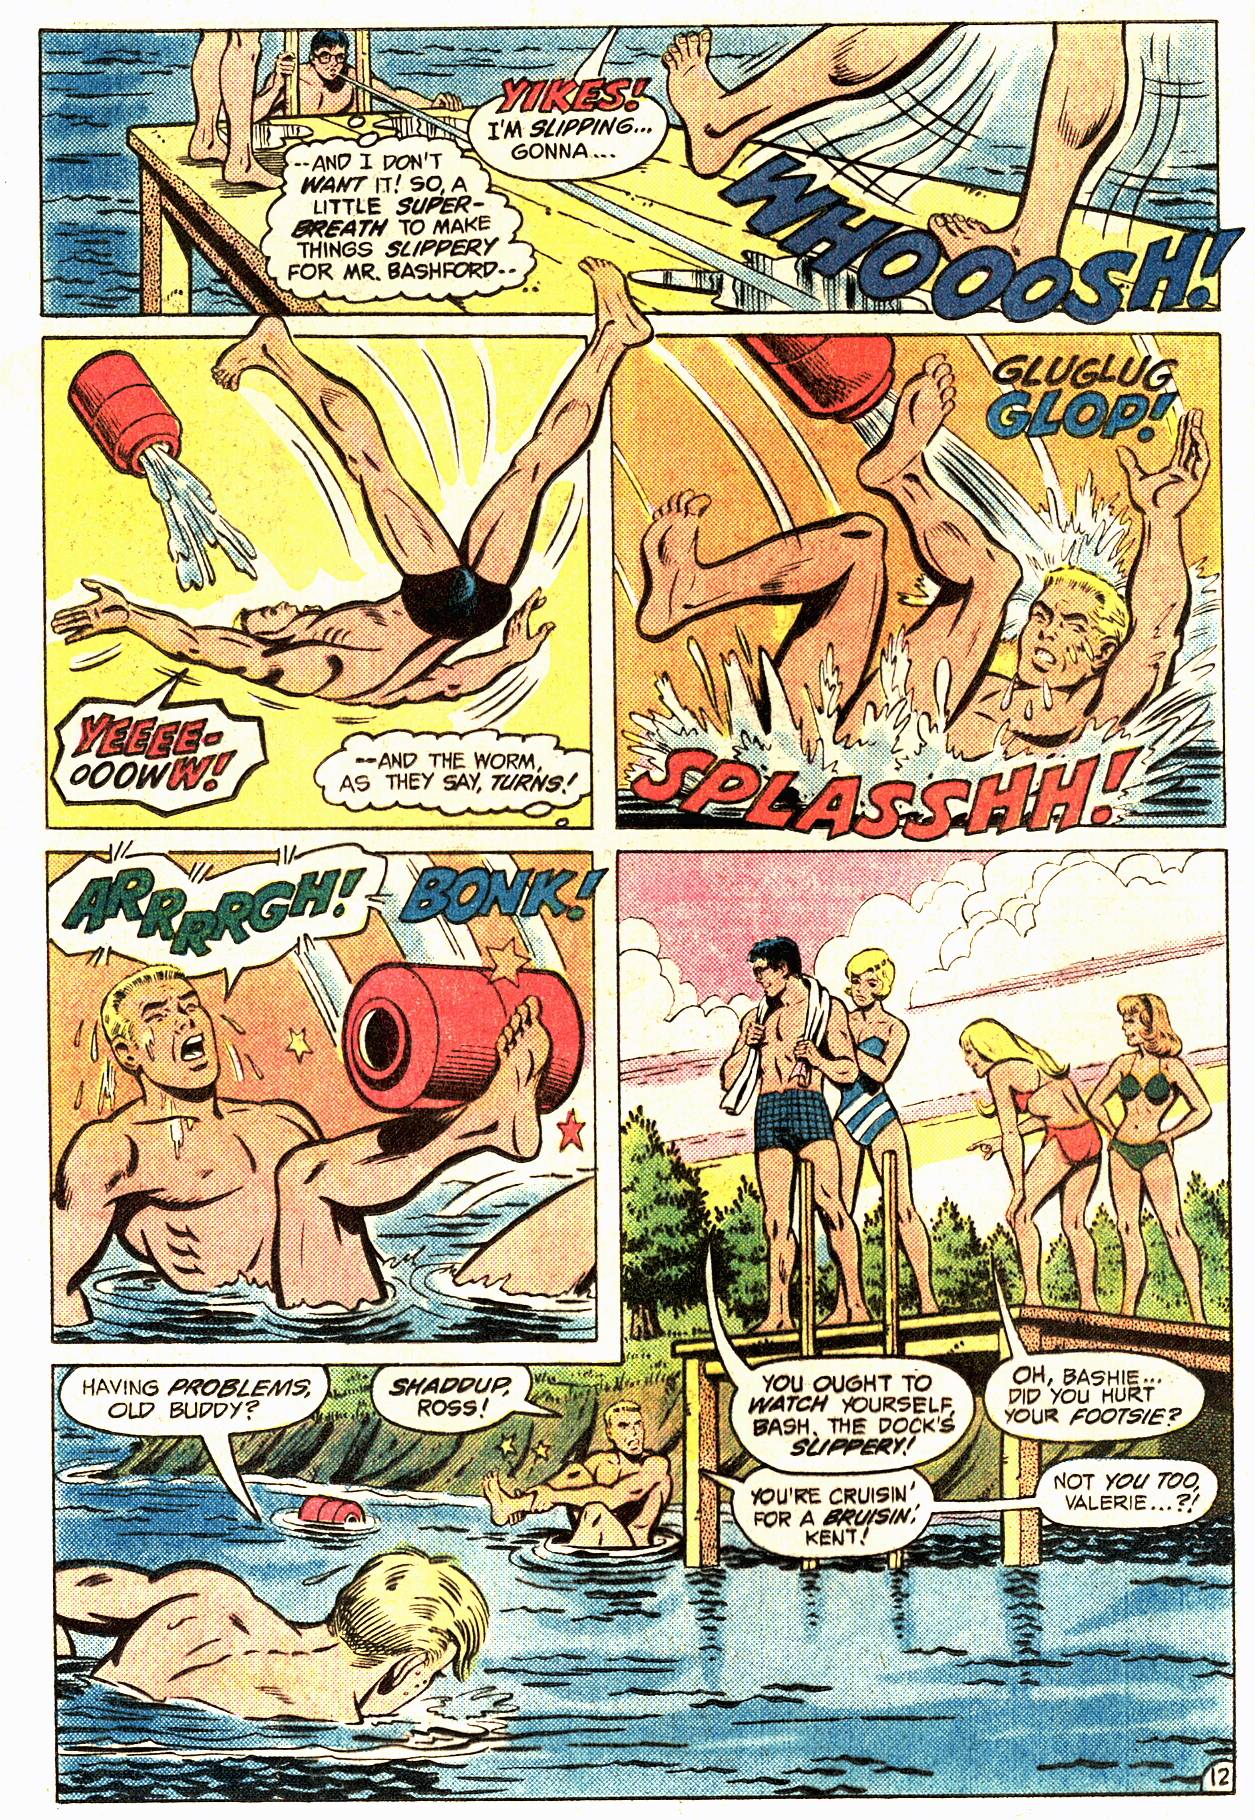 The New Adventures of Superboy 50 Page 12